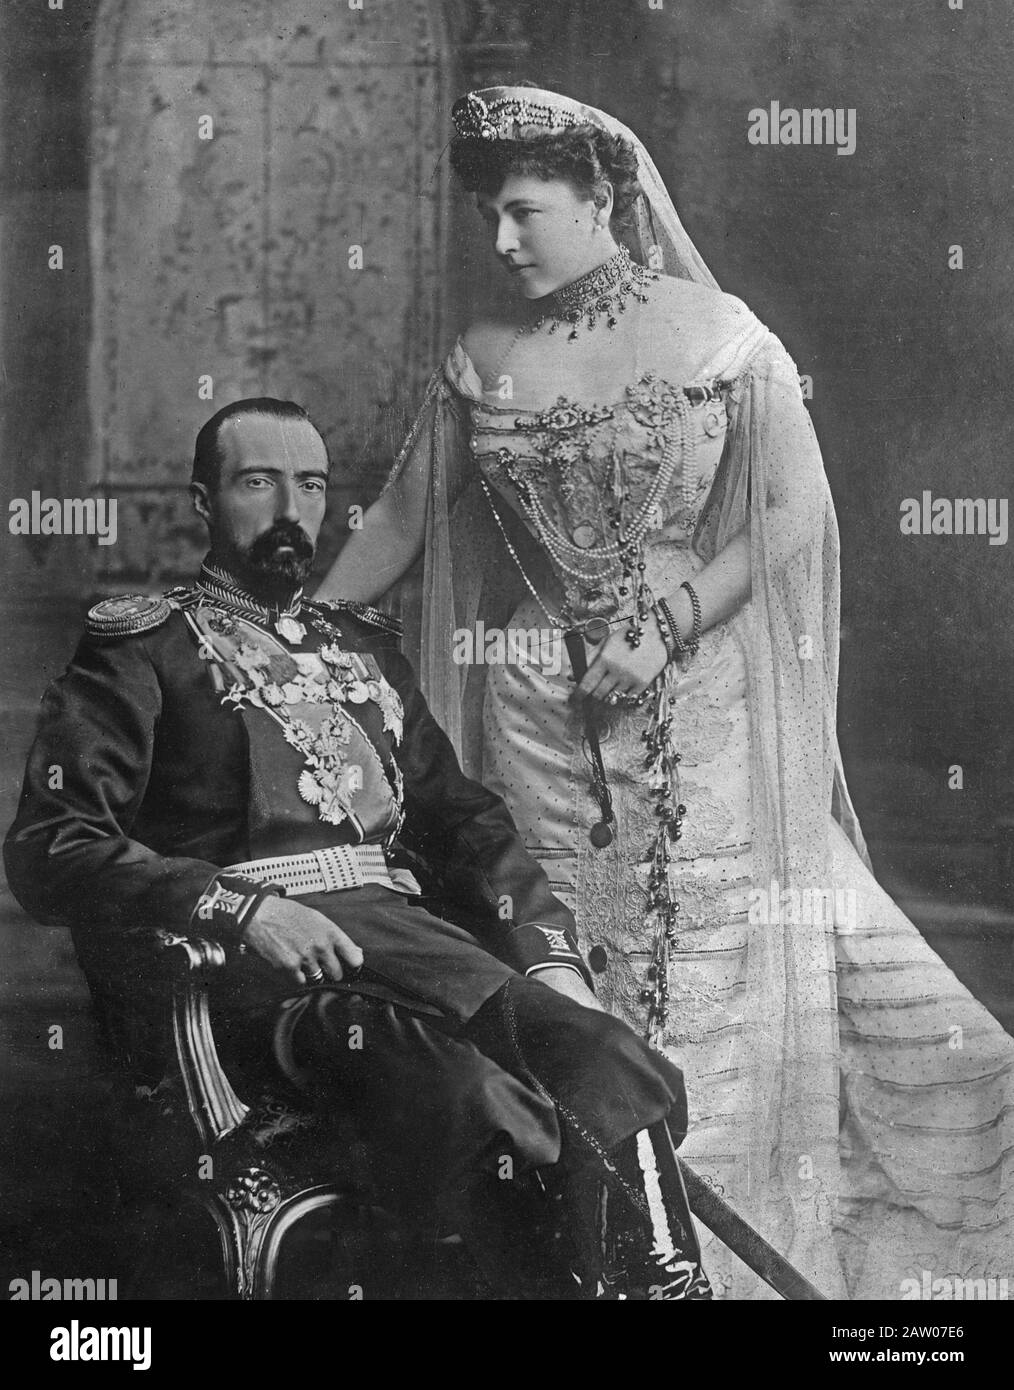 Grand Duke Michael Mikhailovich of Russia (1861-1929) and his wife Countess Sophie of Merenberg, Countess de Torby (1868-1927) ca. 1913 Stock Photo